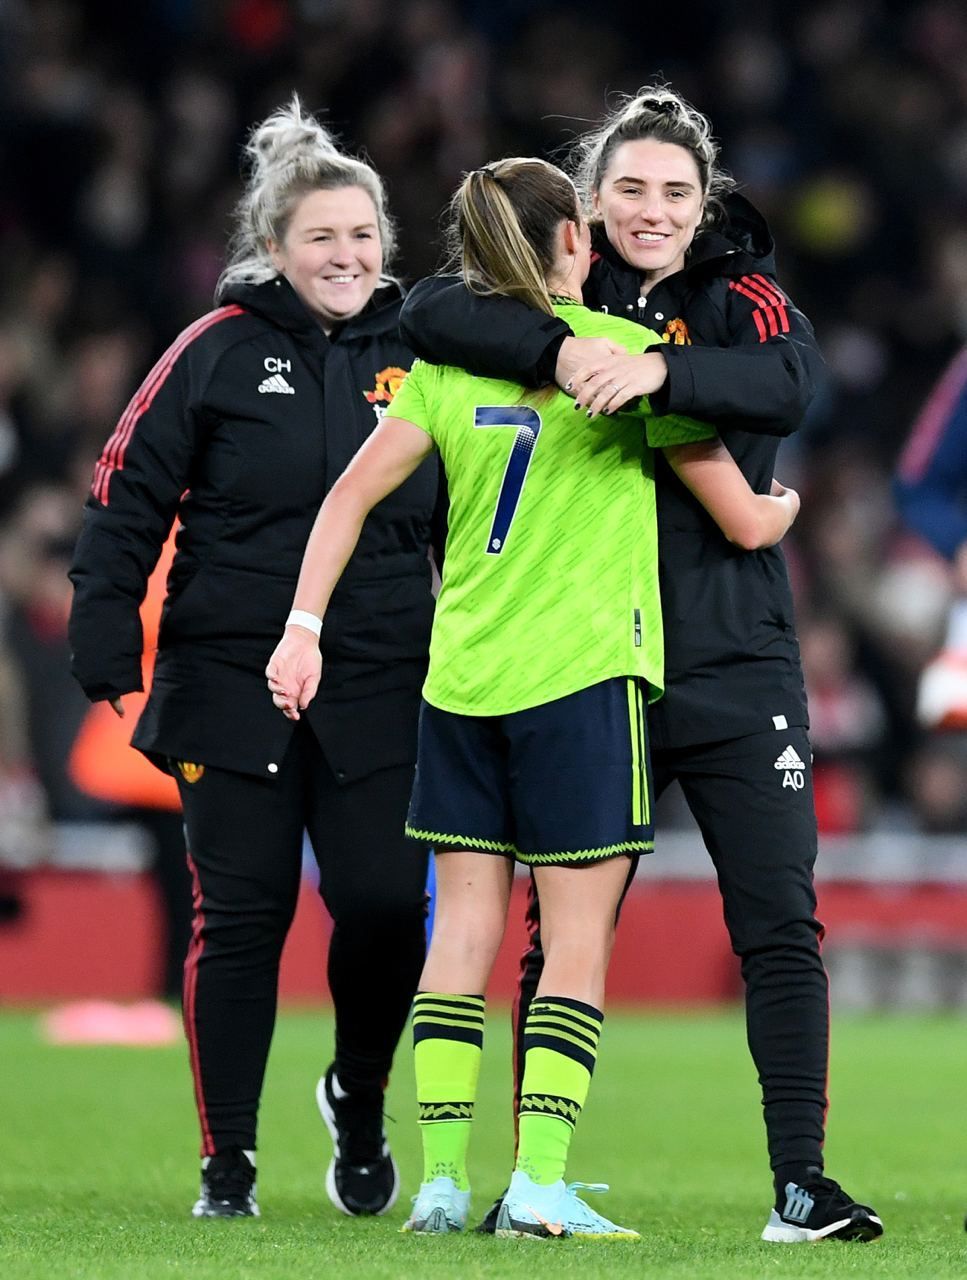 aimee o'keeffe, man u's nutritionist, hugging a player on the pitch